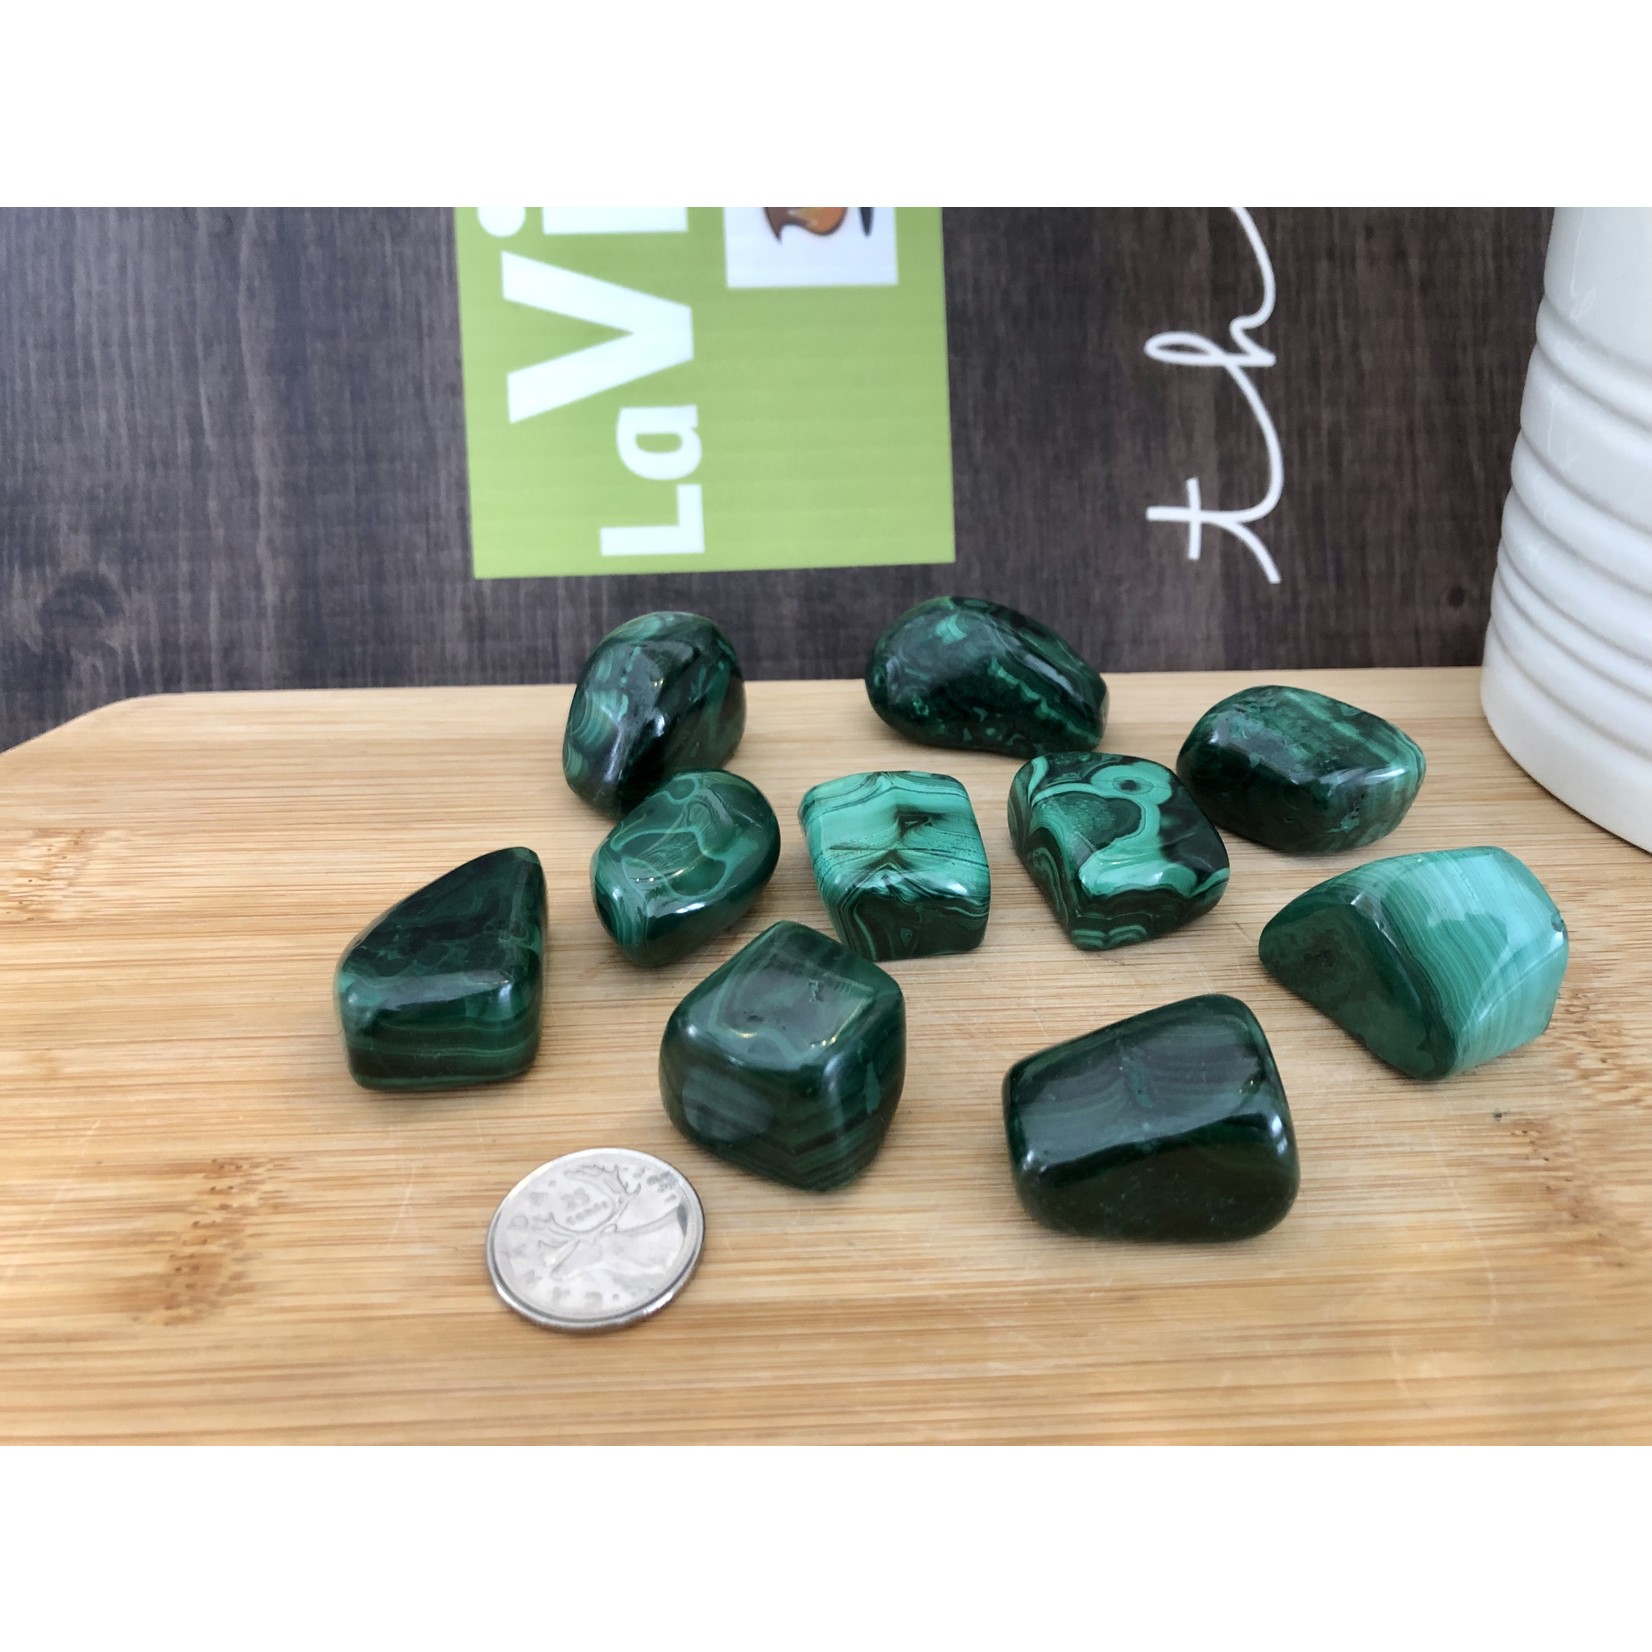 Exquisite Premium Malachite Tumbled Stone - A Luxurious Green Mineral for Pain Relief and Wellness